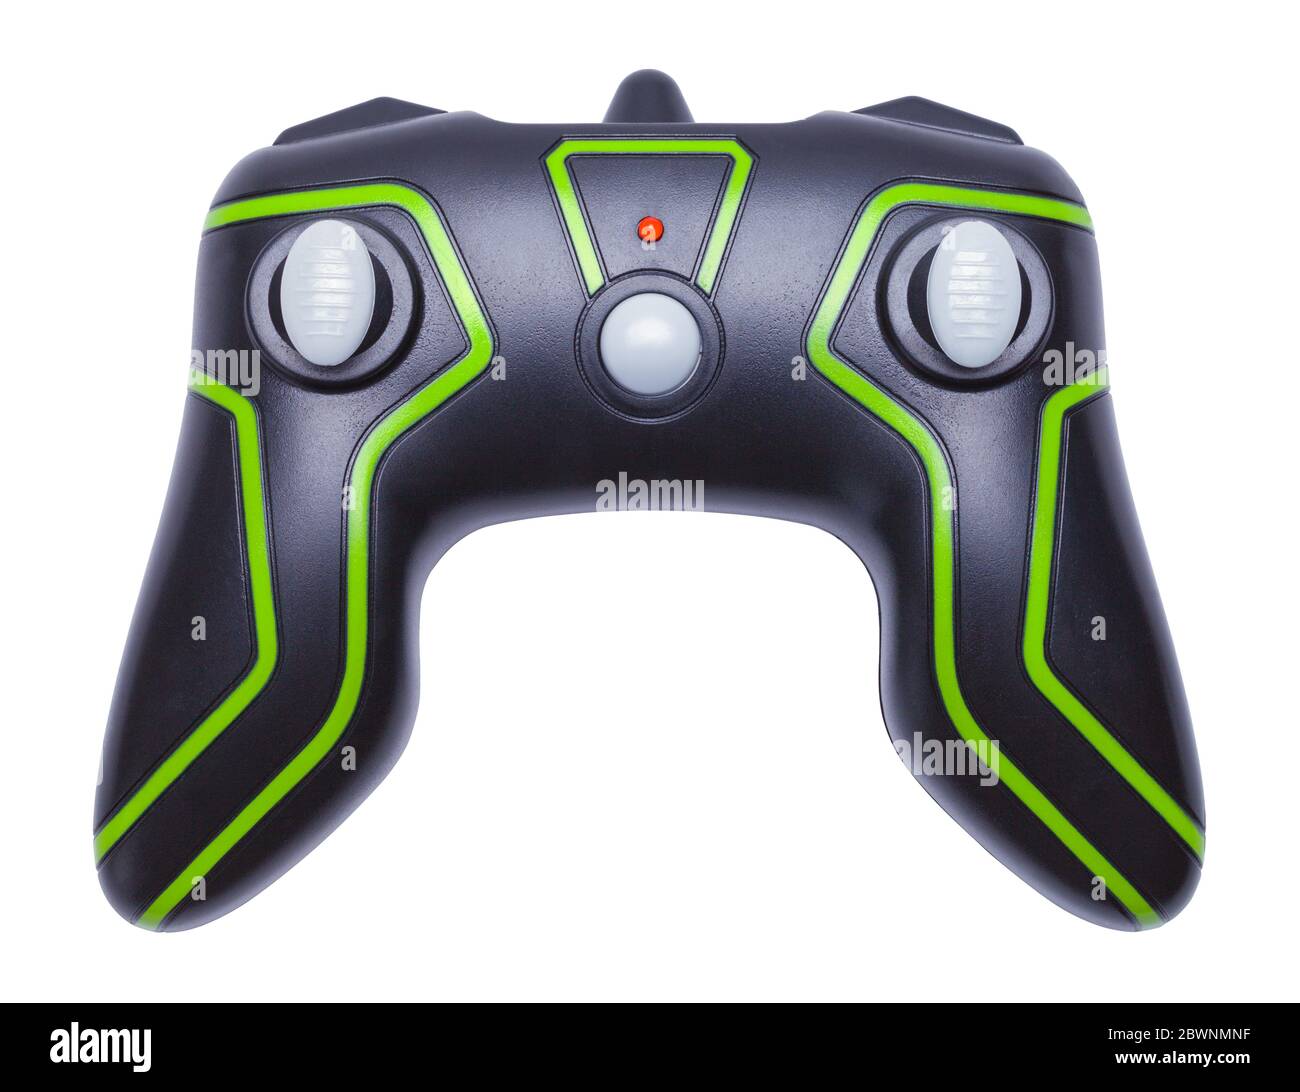 Black and Green Wireless Video Game Controller Top View Isolated on White. Stock Photo